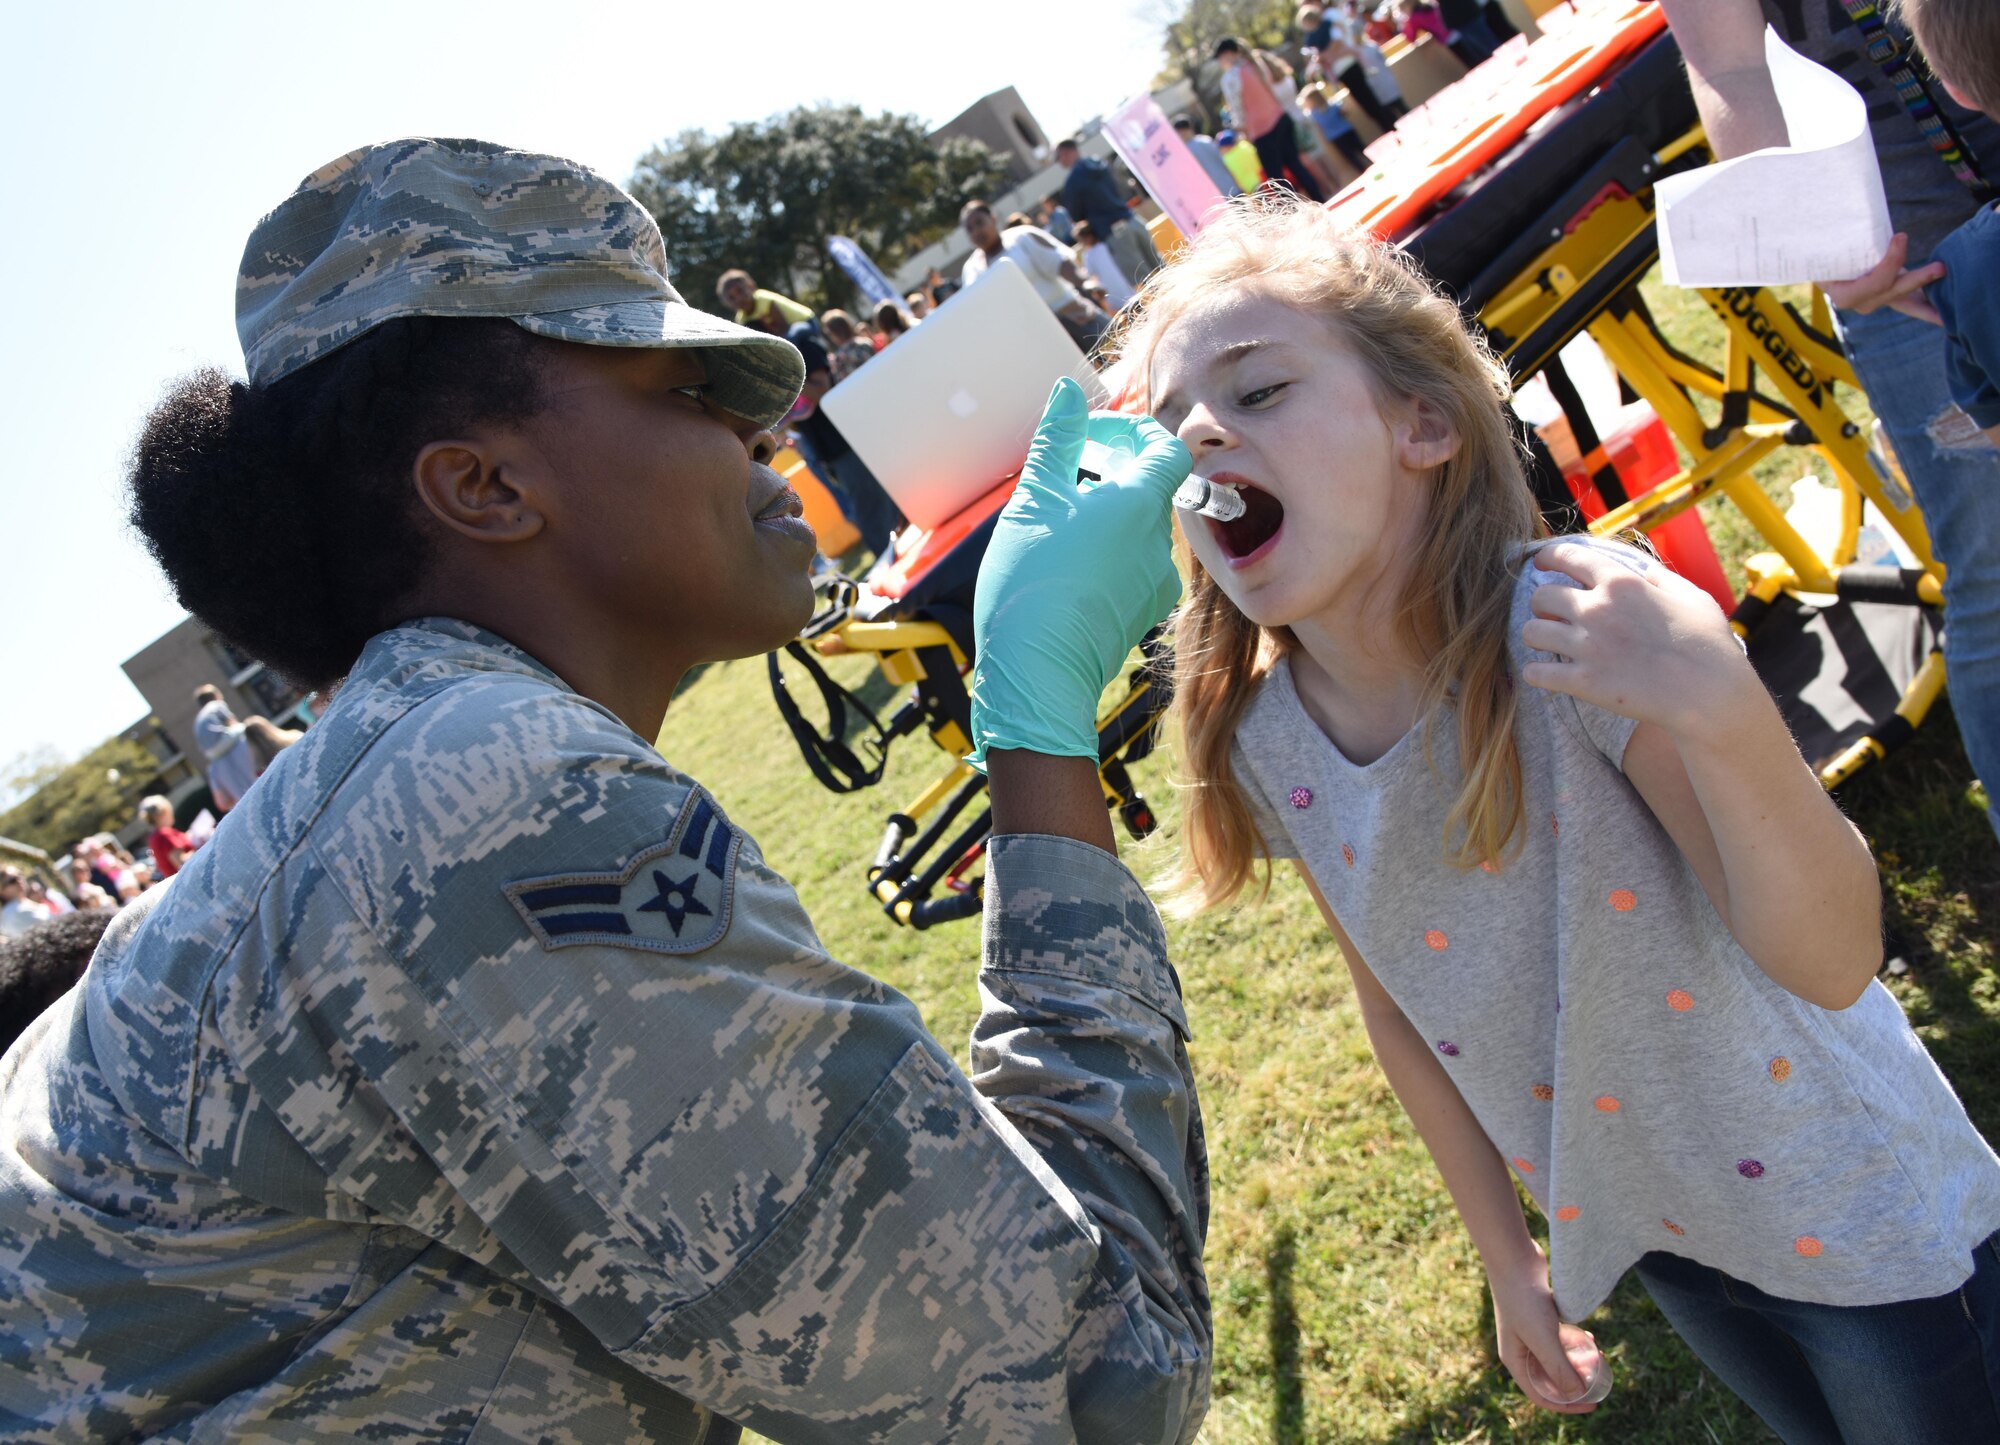 Airman 1st Class Chante Birdlong, 81st Medical Operations Squadron administration technician, administers juice to Madison Maxey, daughter of Kristen Maxey, during Operation Hero March 18, 2017, on Keesler Air Force Base, Miss. The activities at the event were designed to help children better understand what their parents do when they deploy. (U.S. Air Force photo by Kemberly Groue)